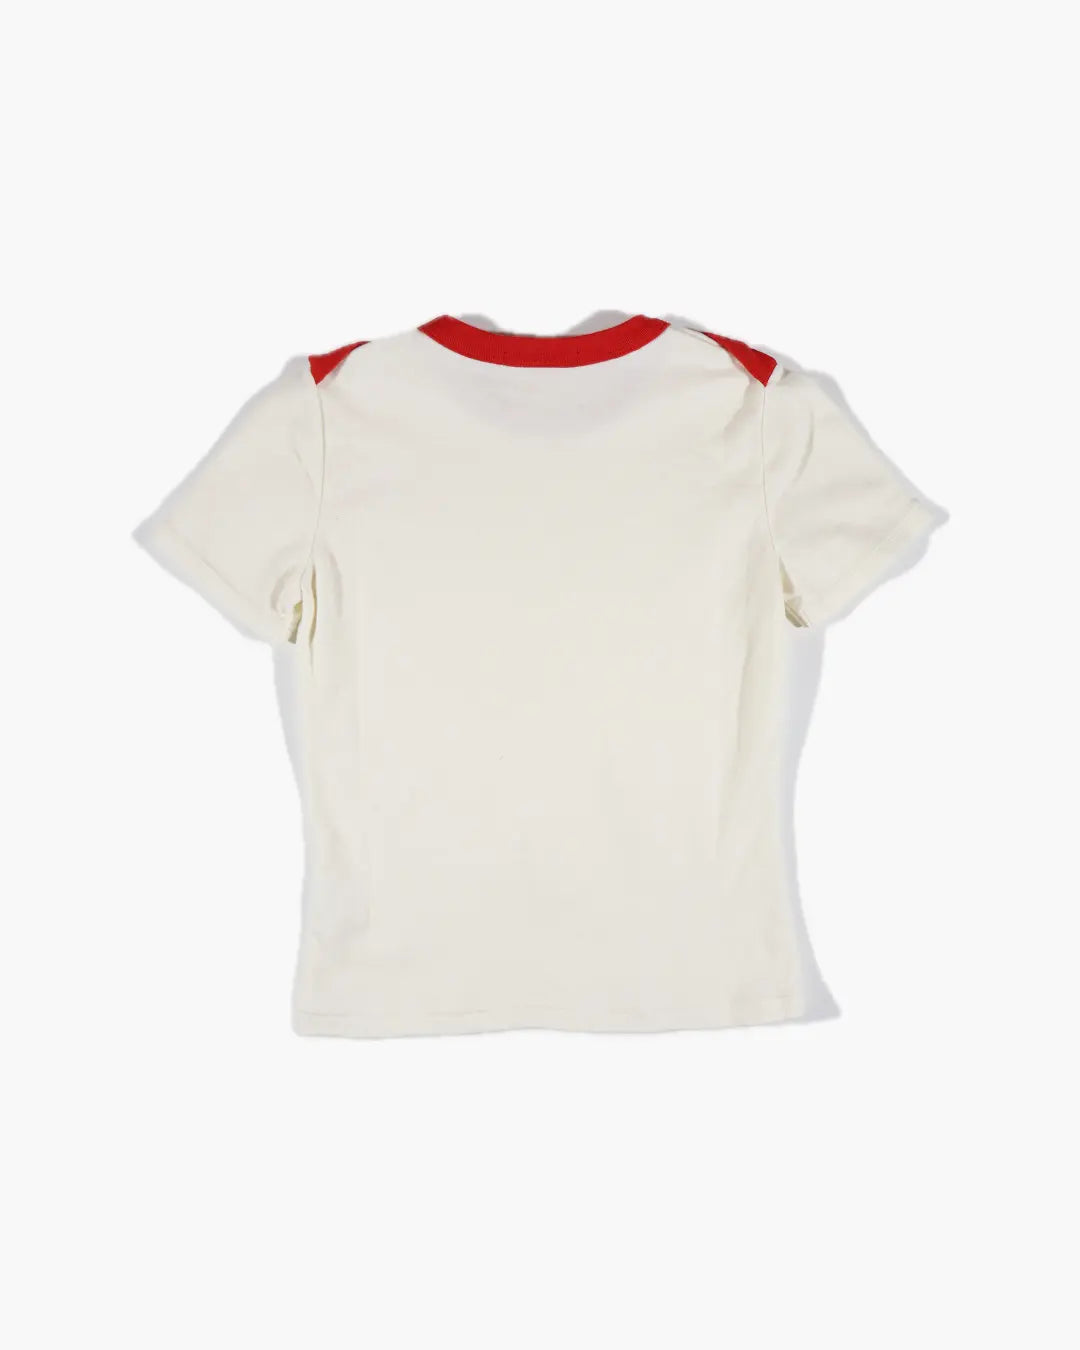 FUMIKA_UCHIDA / TRIMMED DOUBLE NECK TEE / OFFWHITE/RED - 601 | – 601 |  オンラインストア